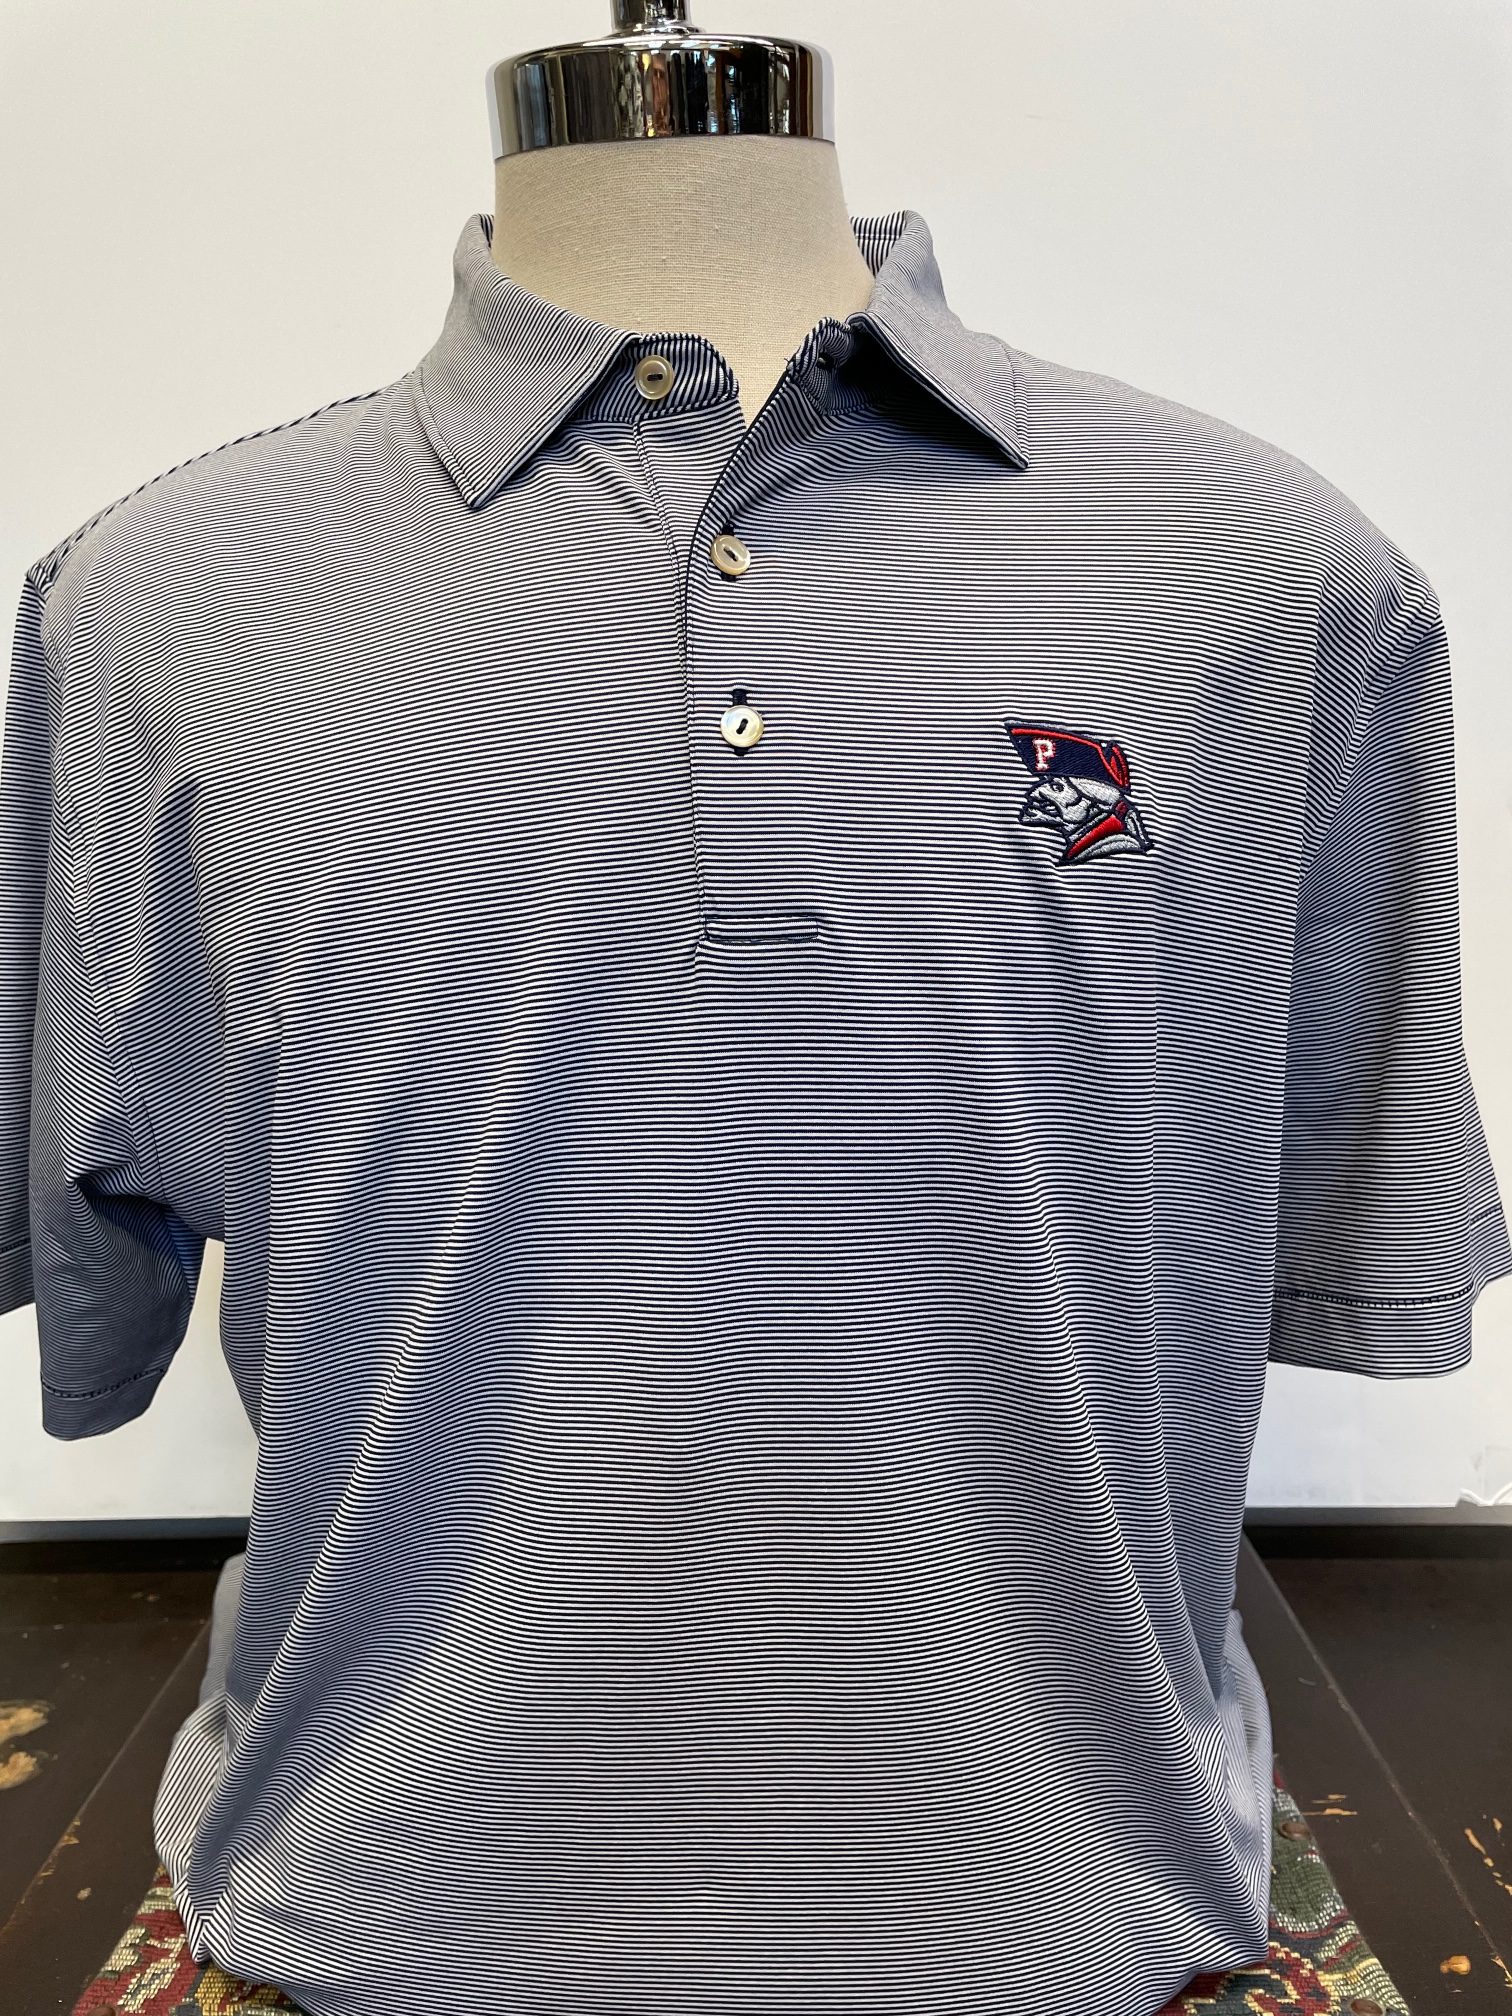 Arendell Parrott Academy Jubilee Stripe Performance Polo - Coffmans